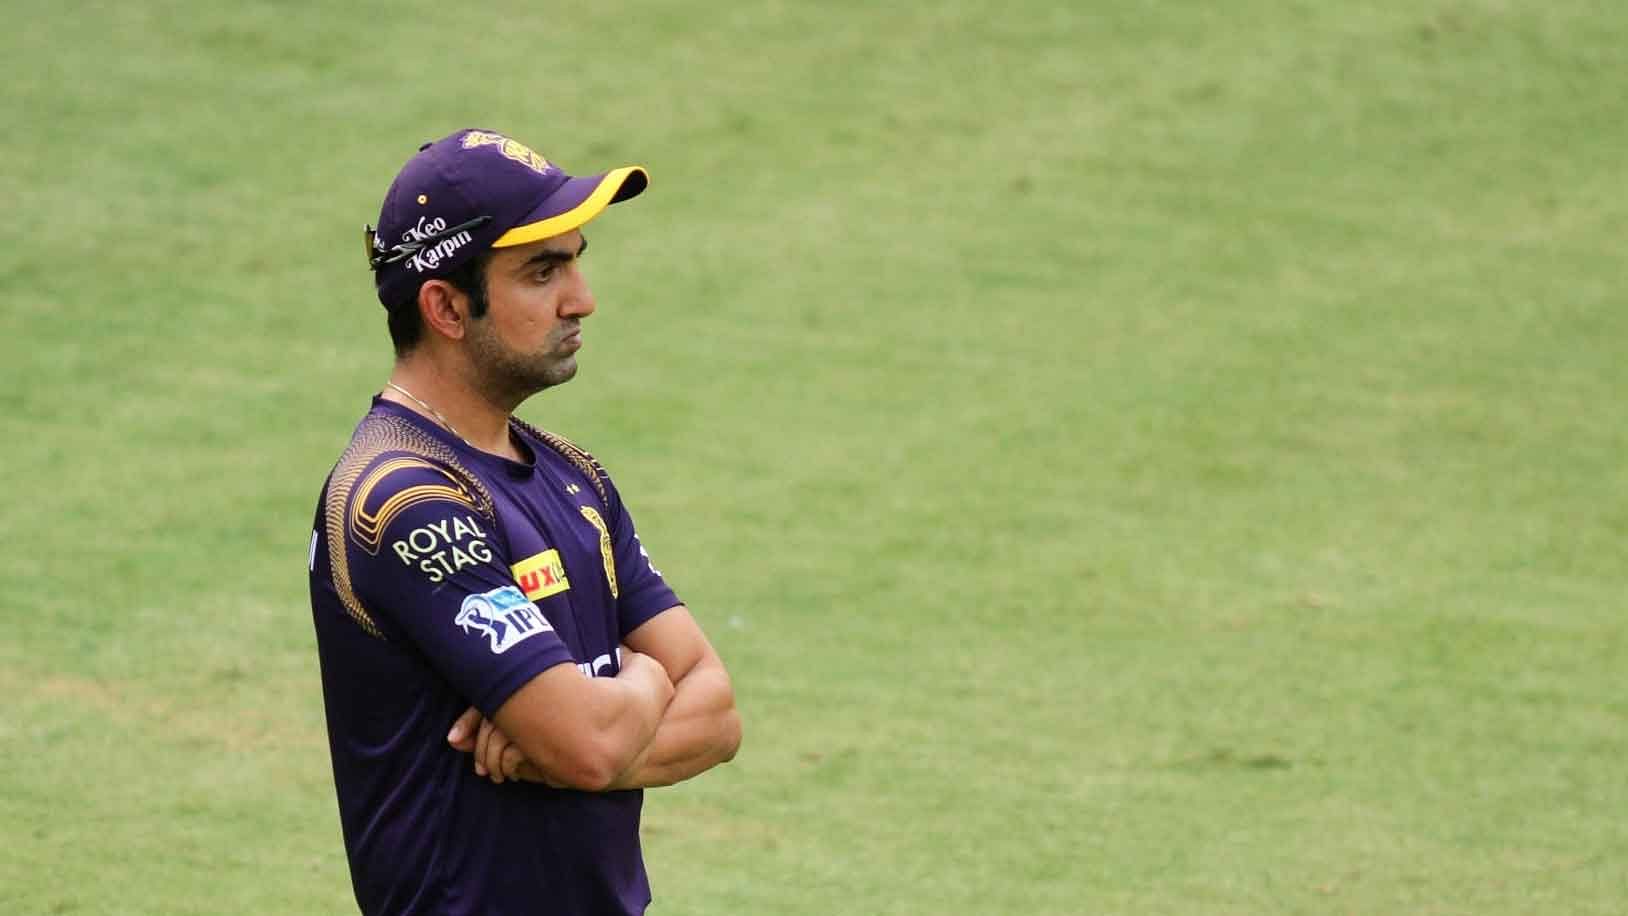 Gautam Gambhir has pledged to take care of the entire education expenses of the children of the Sukhma attack martyrs. (Photo: IANS)